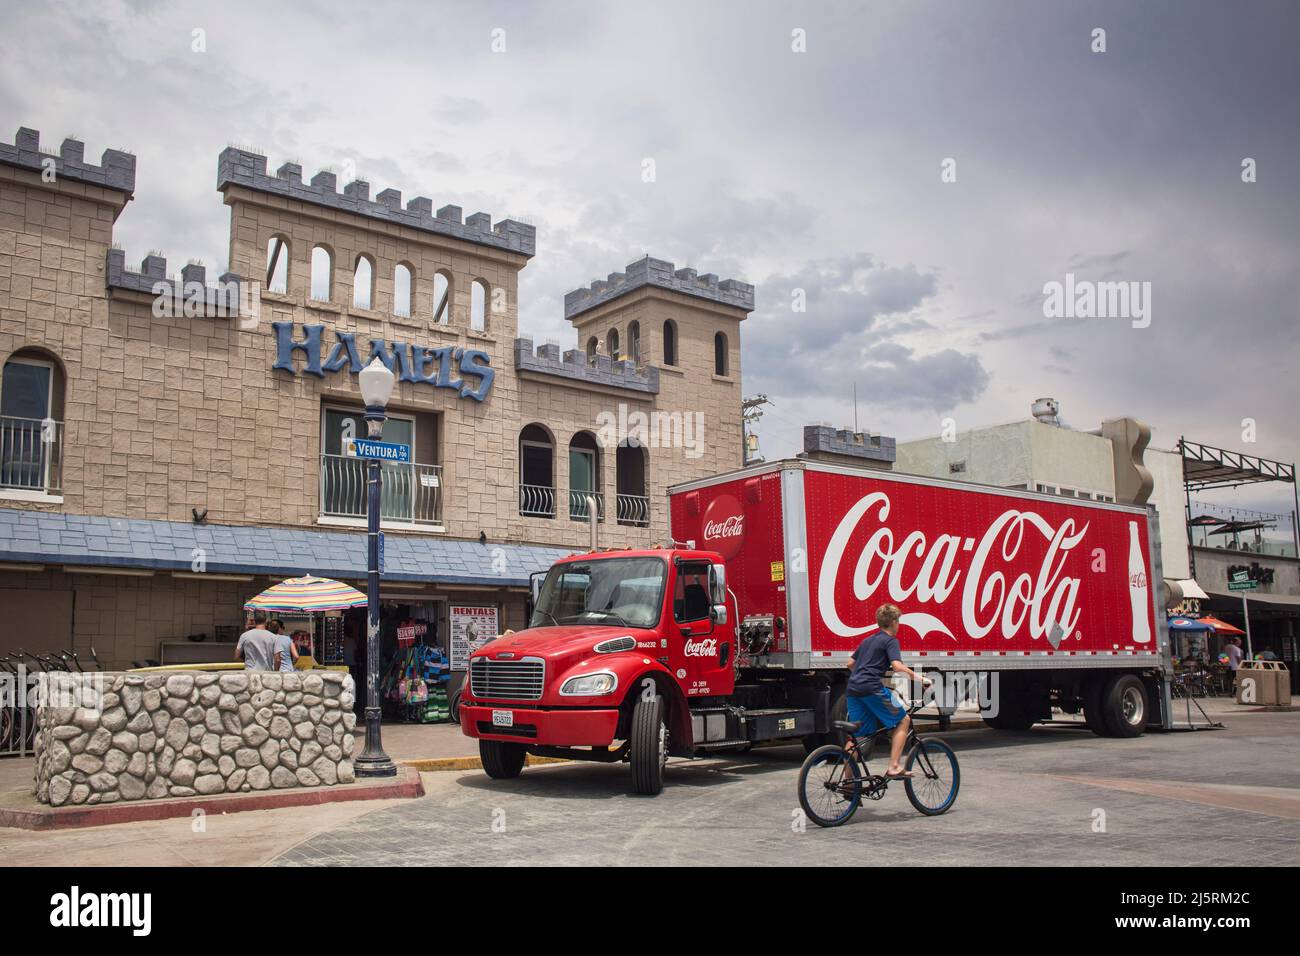 Coca-cola truck parked in front of the castle-shaped Hamel’s Surf shop in Mission Bay, San Diego Stock Photo